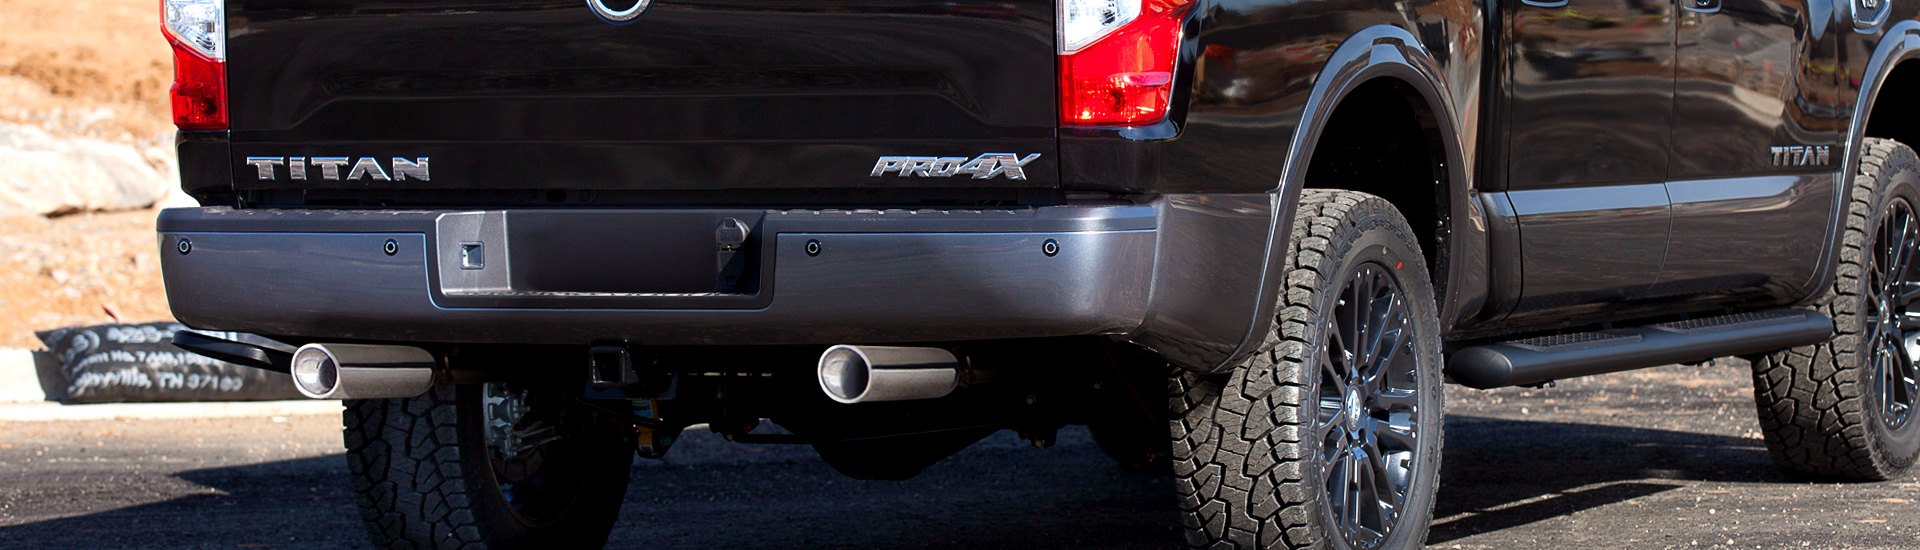 Show Off the True Nature Of Your Titan With New Borla S-Type Cat-Back Exhaust